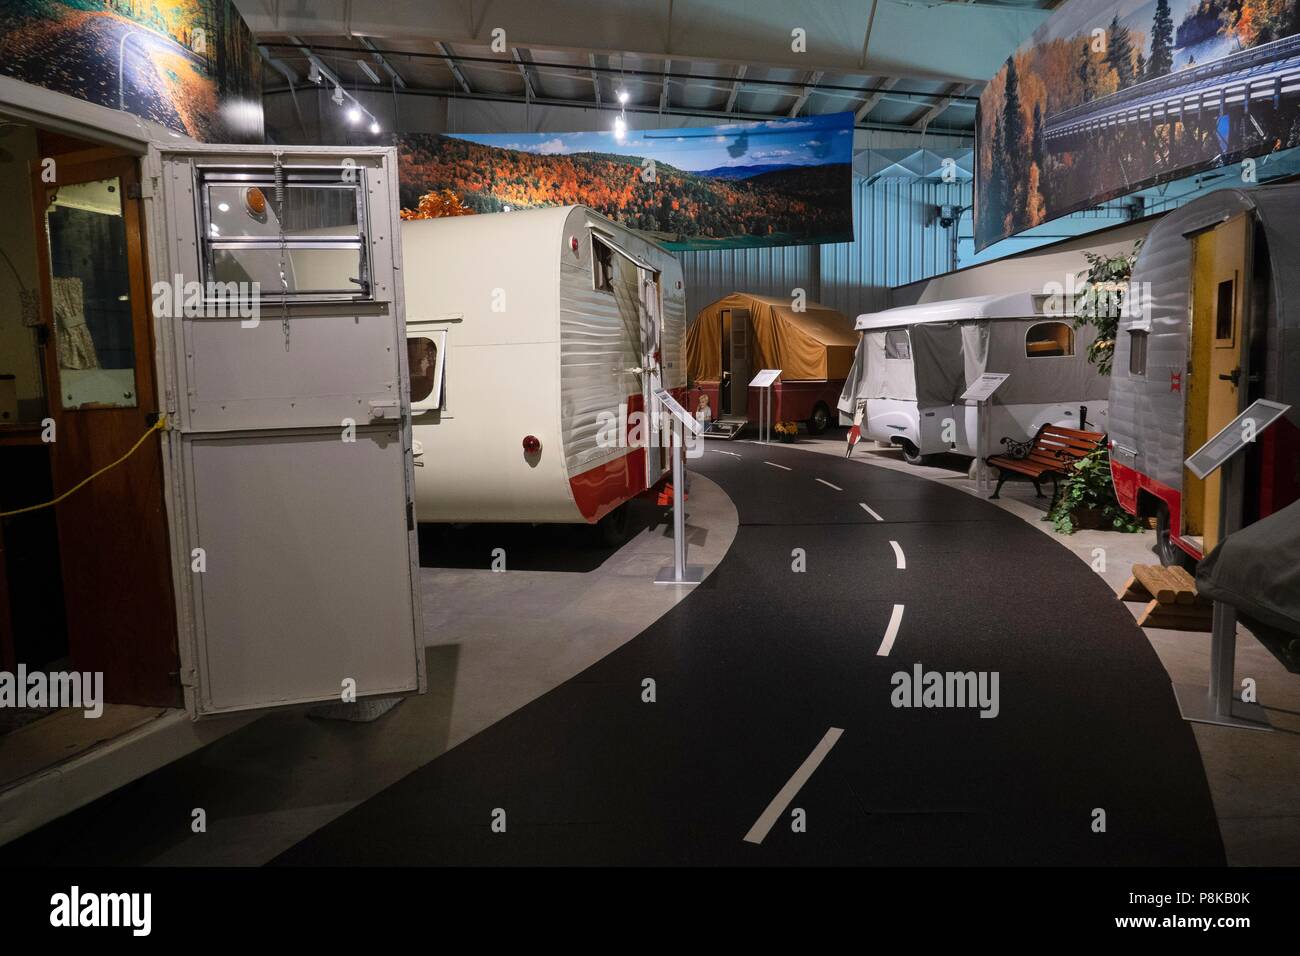 Interior display of retro and antique recreational vehicles at the national RV museum in Elkhart Indiana Stock Photo